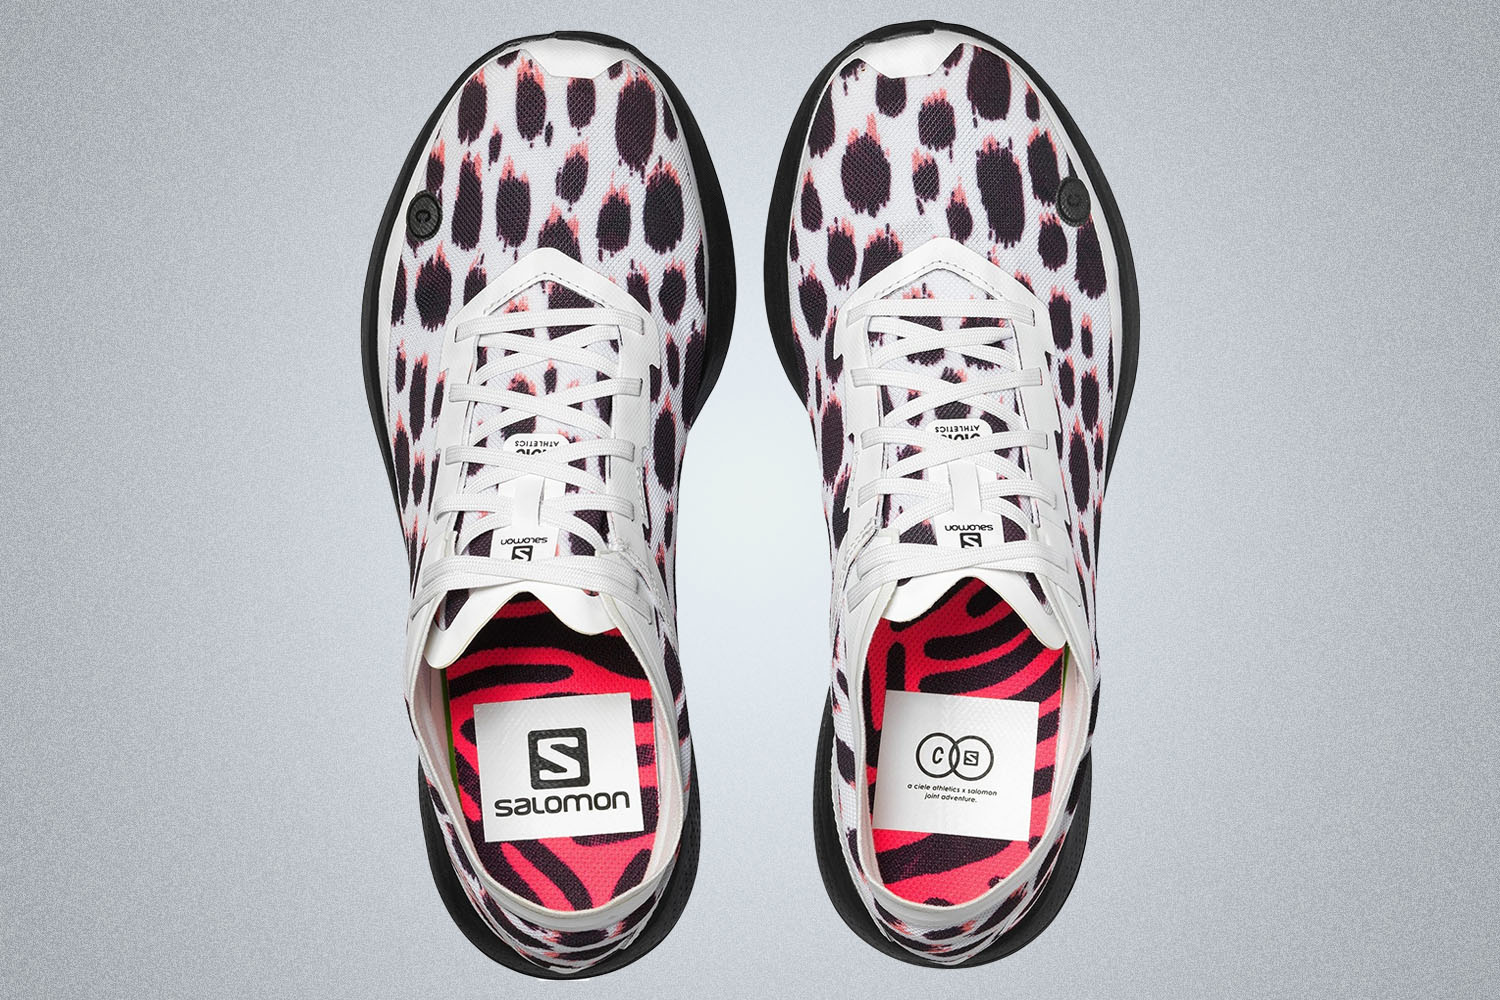 a pair of colorful white and red polka dot runners from Salomon on a gray background